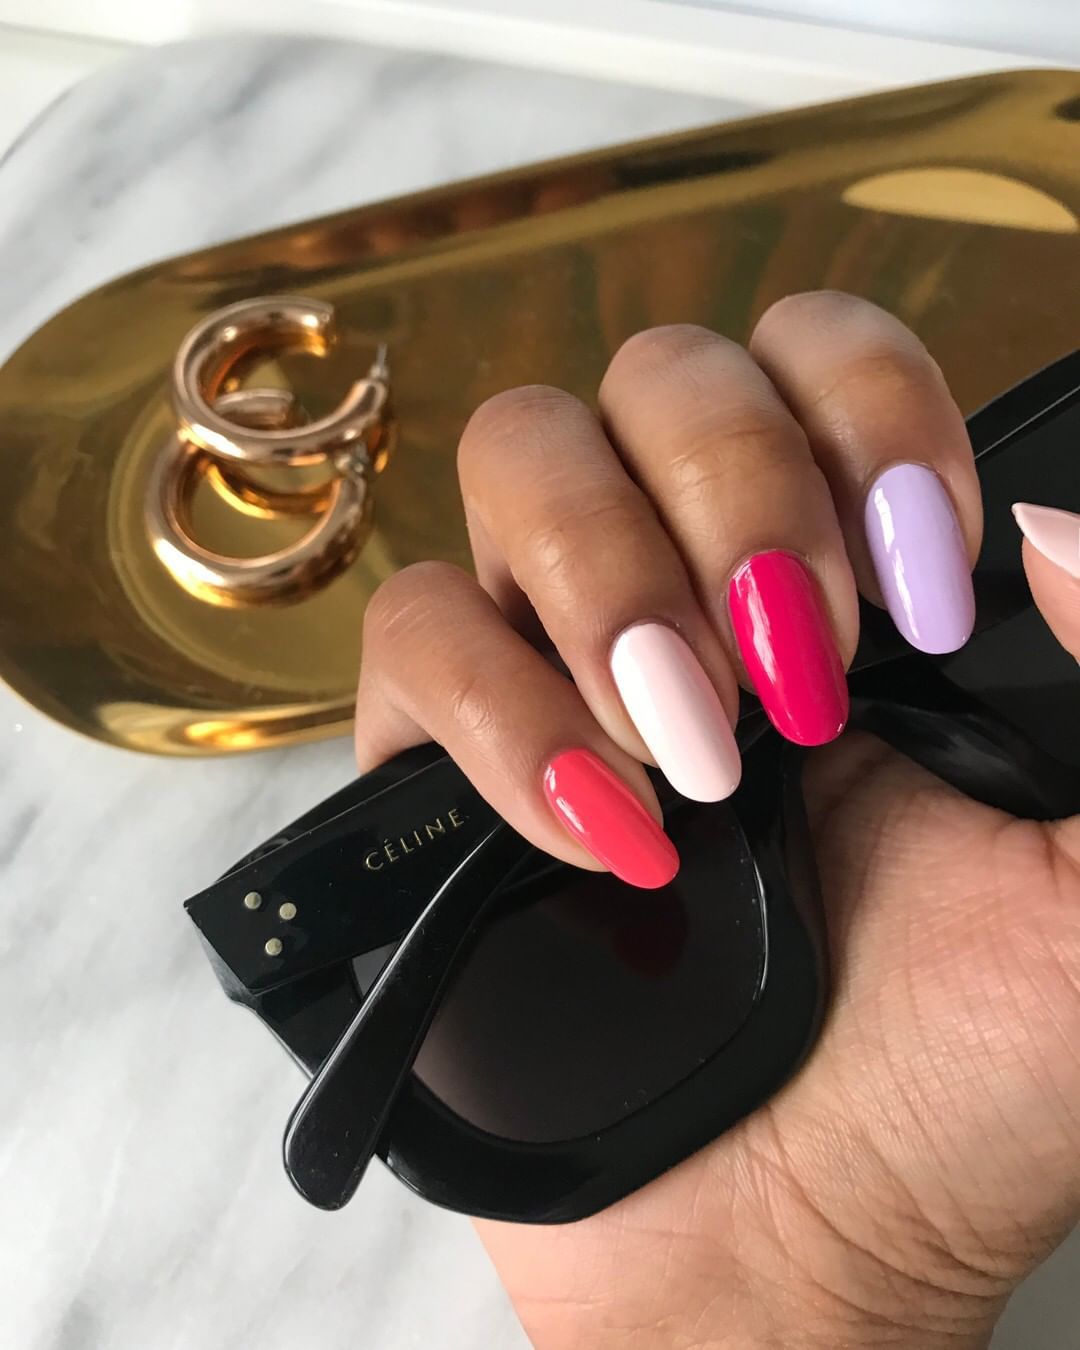 I Tried the New Nail Polish That Dries in Just 45 Seconds